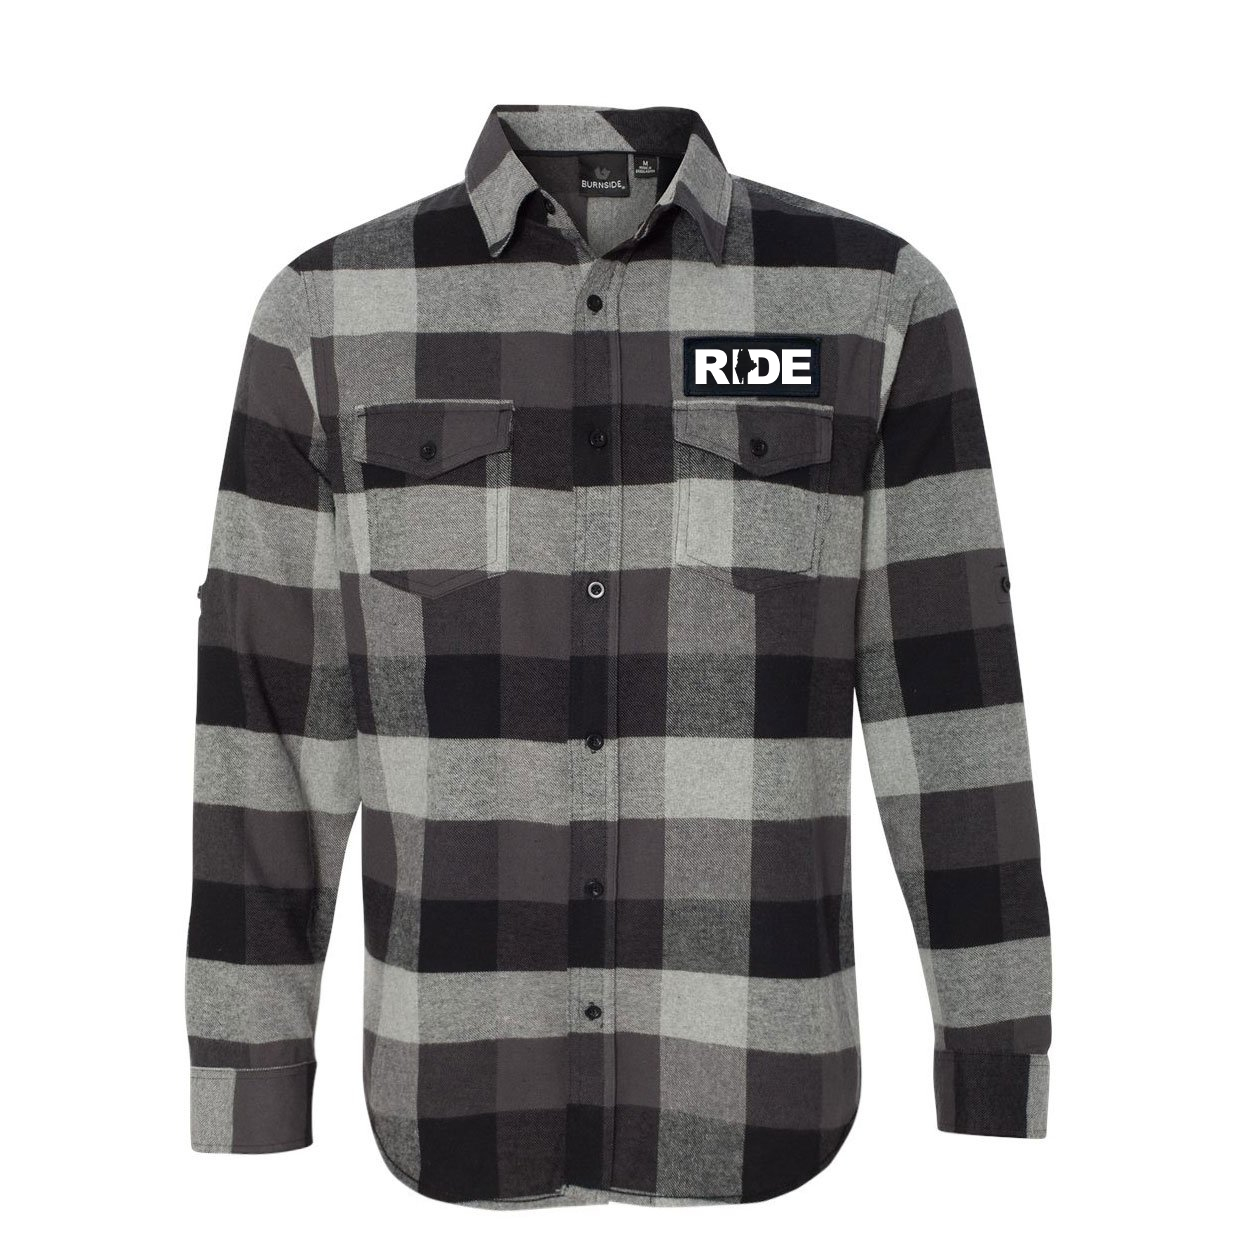 Ride Maine Classic Unisex Long Sleeve Woven Patch Flannel Shirt Black/Gray (White Logo)